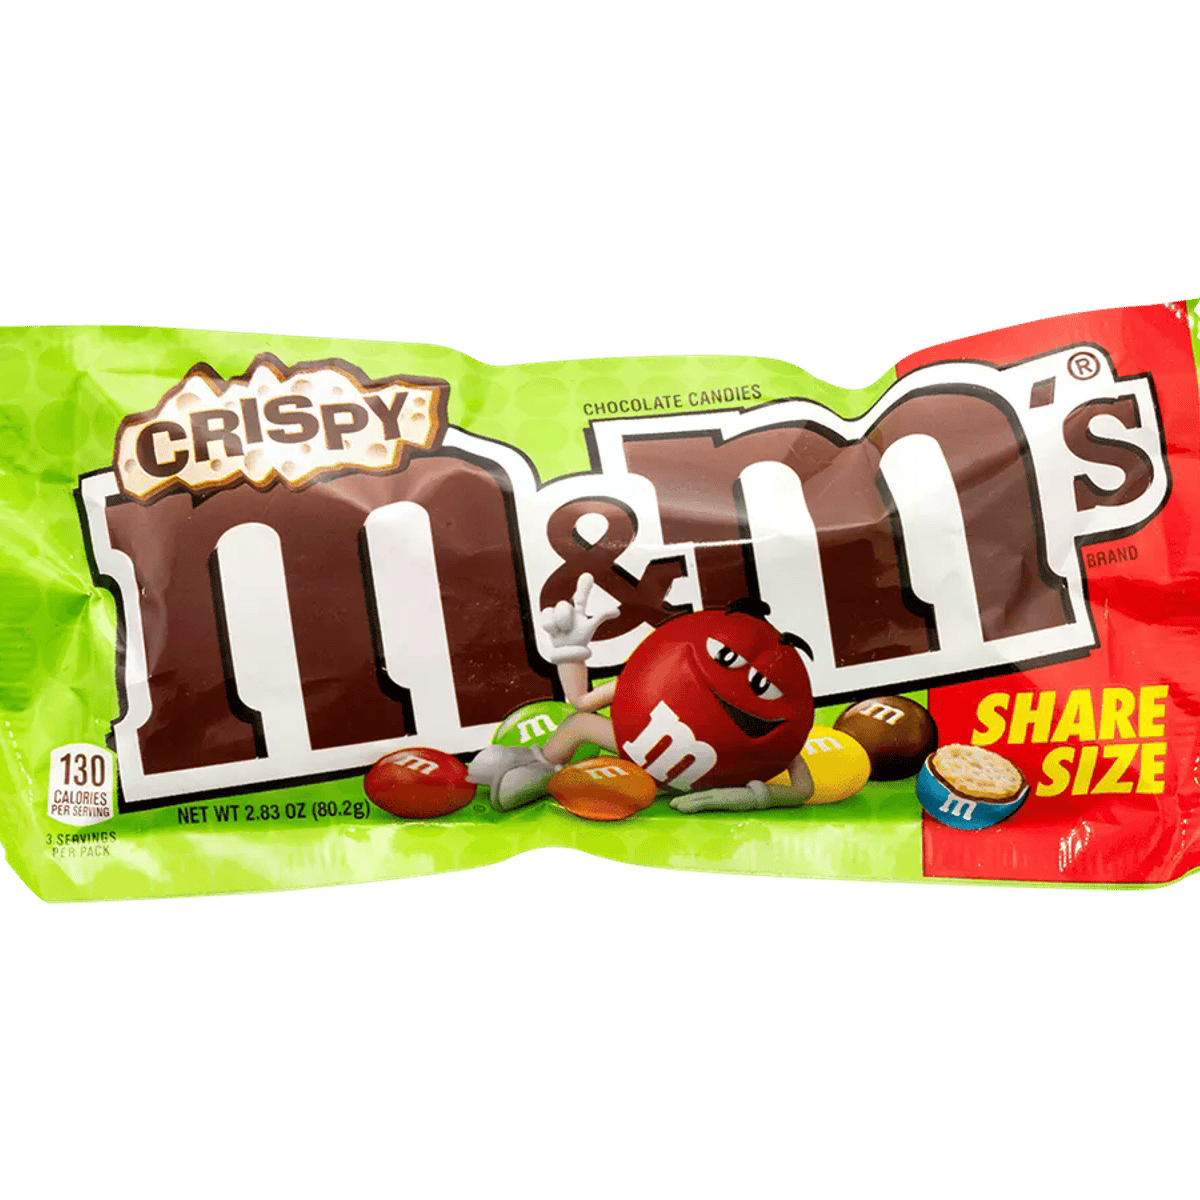 M&M's Ghoul's Mix Caramel Chocolate Candies 9.5 Oz, Chocolate Candy